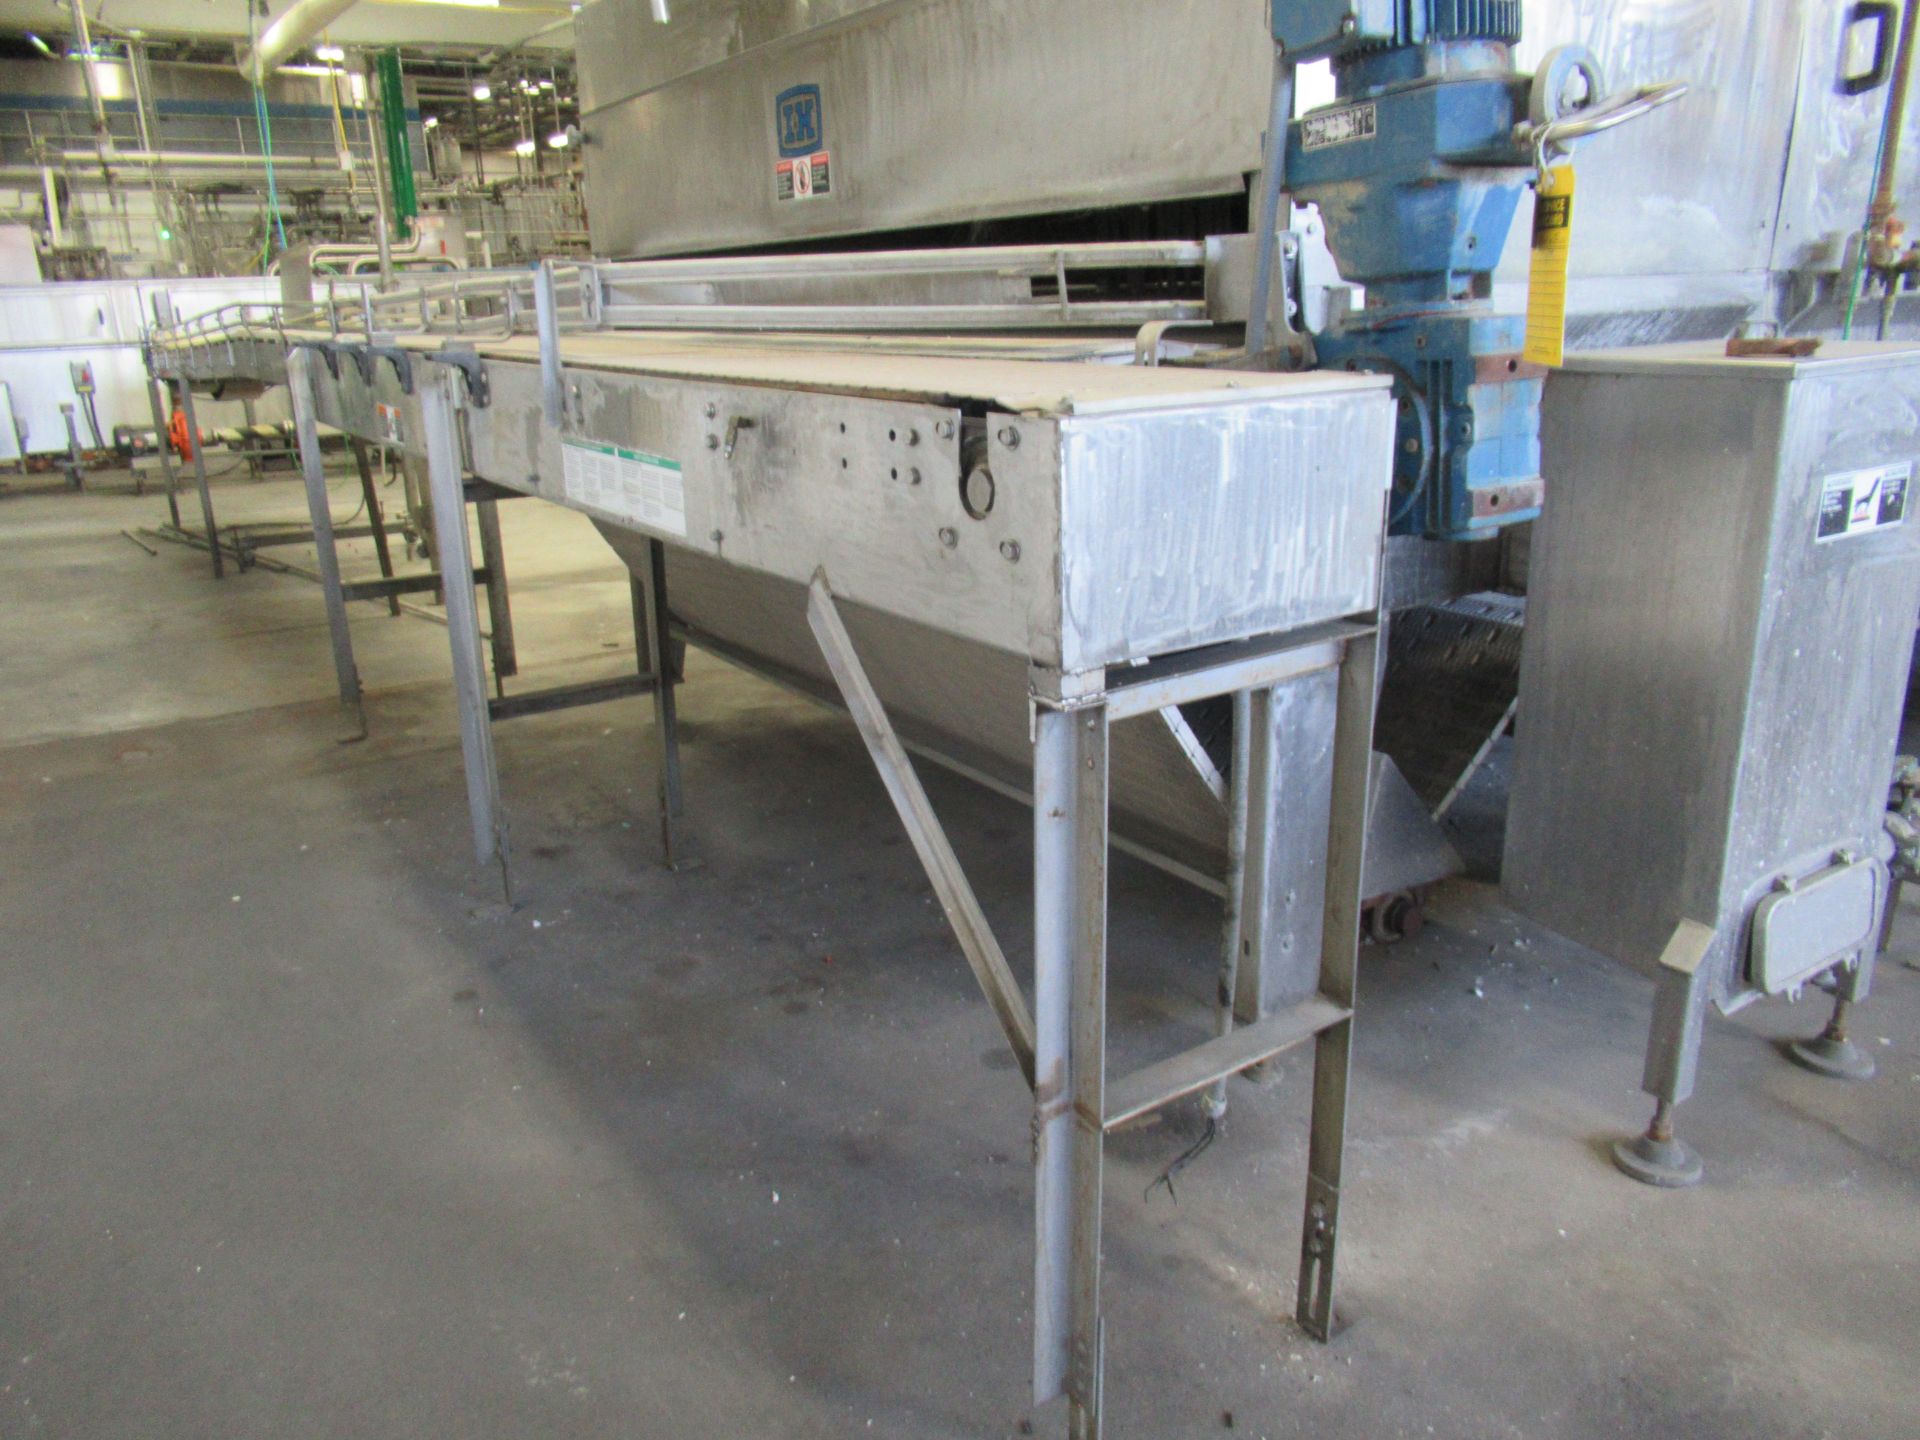 Discharge /Feed Conveyors - Image 3 of 8